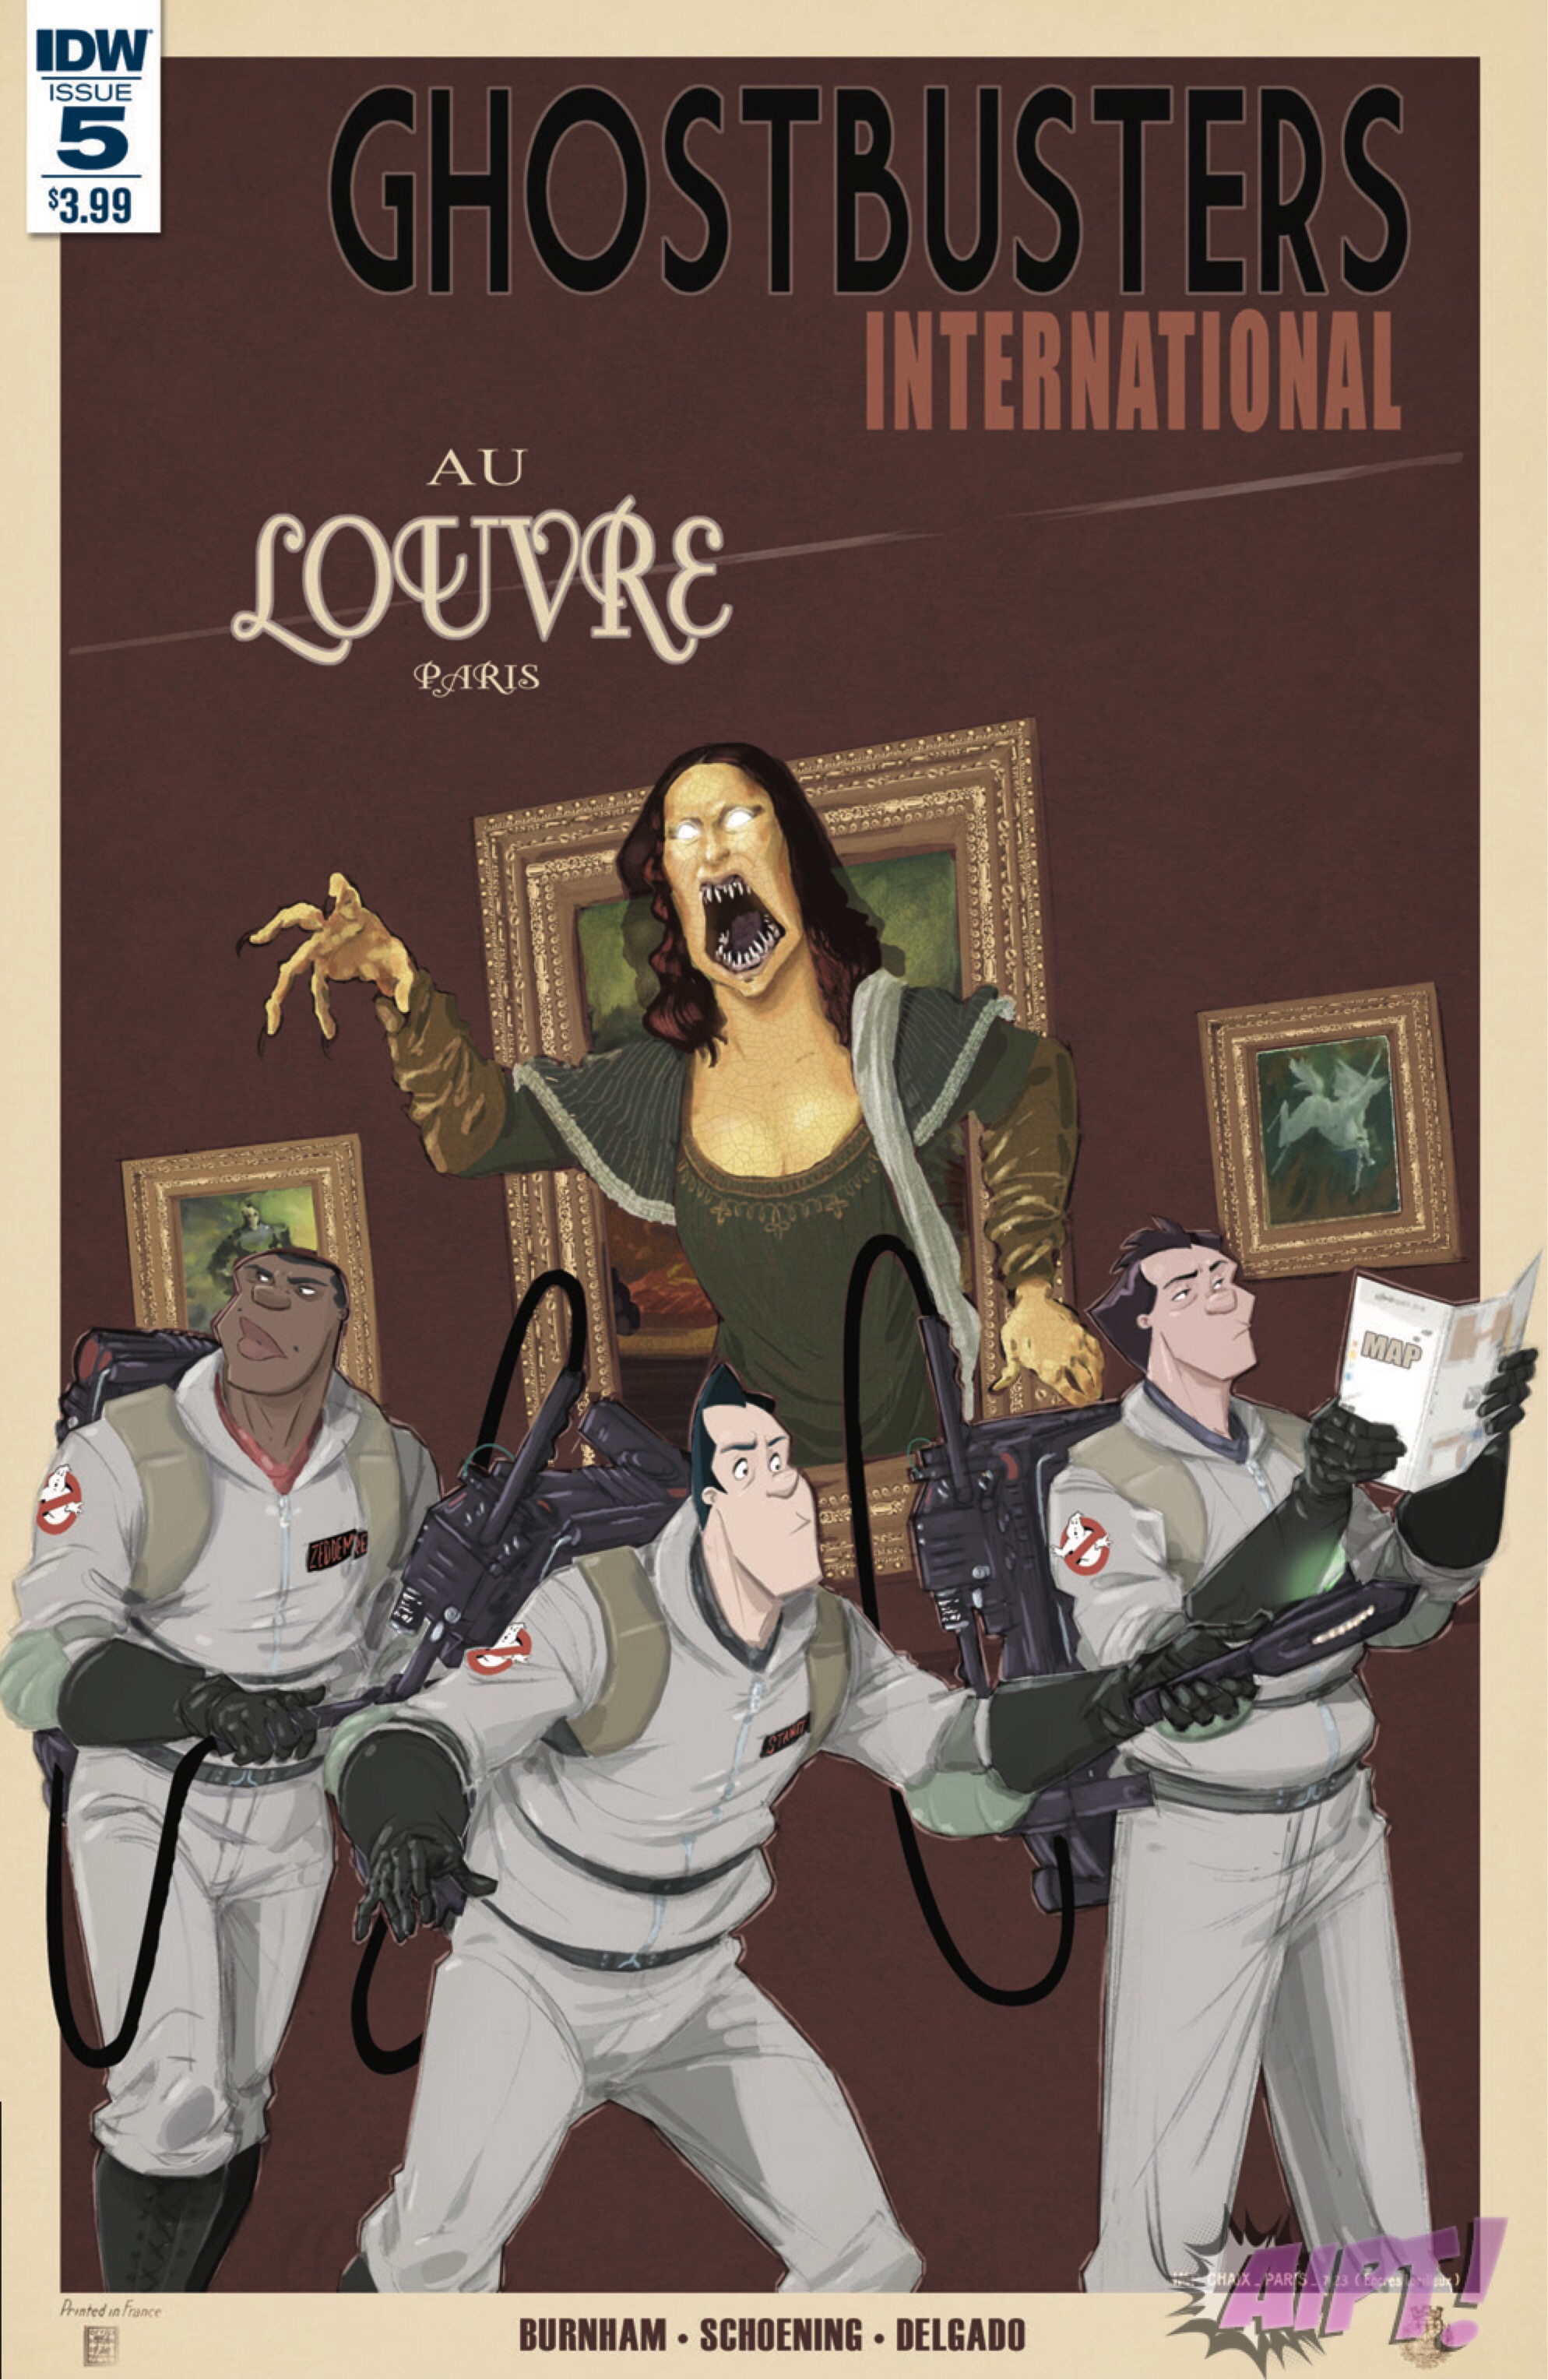 [EXCLUSIVE] IDW Preview: Ghostbusters International #5